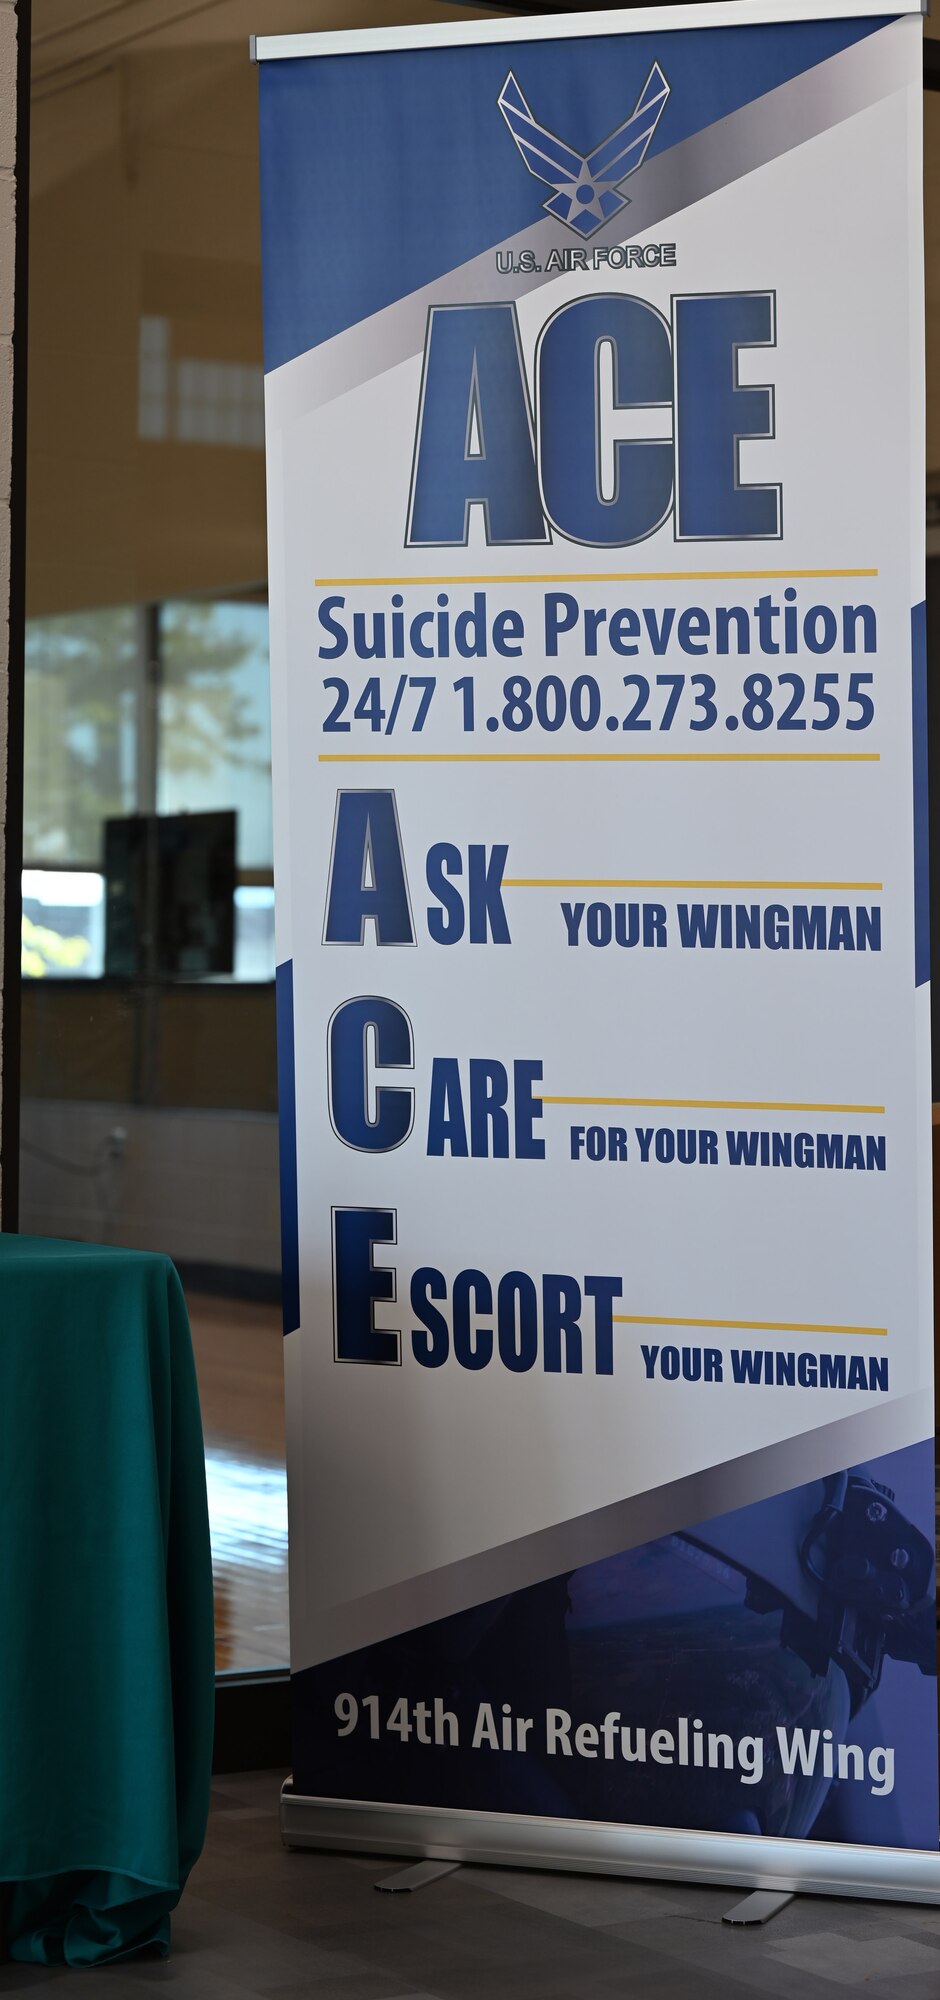 September is Suicide Awareness and Prevention Month